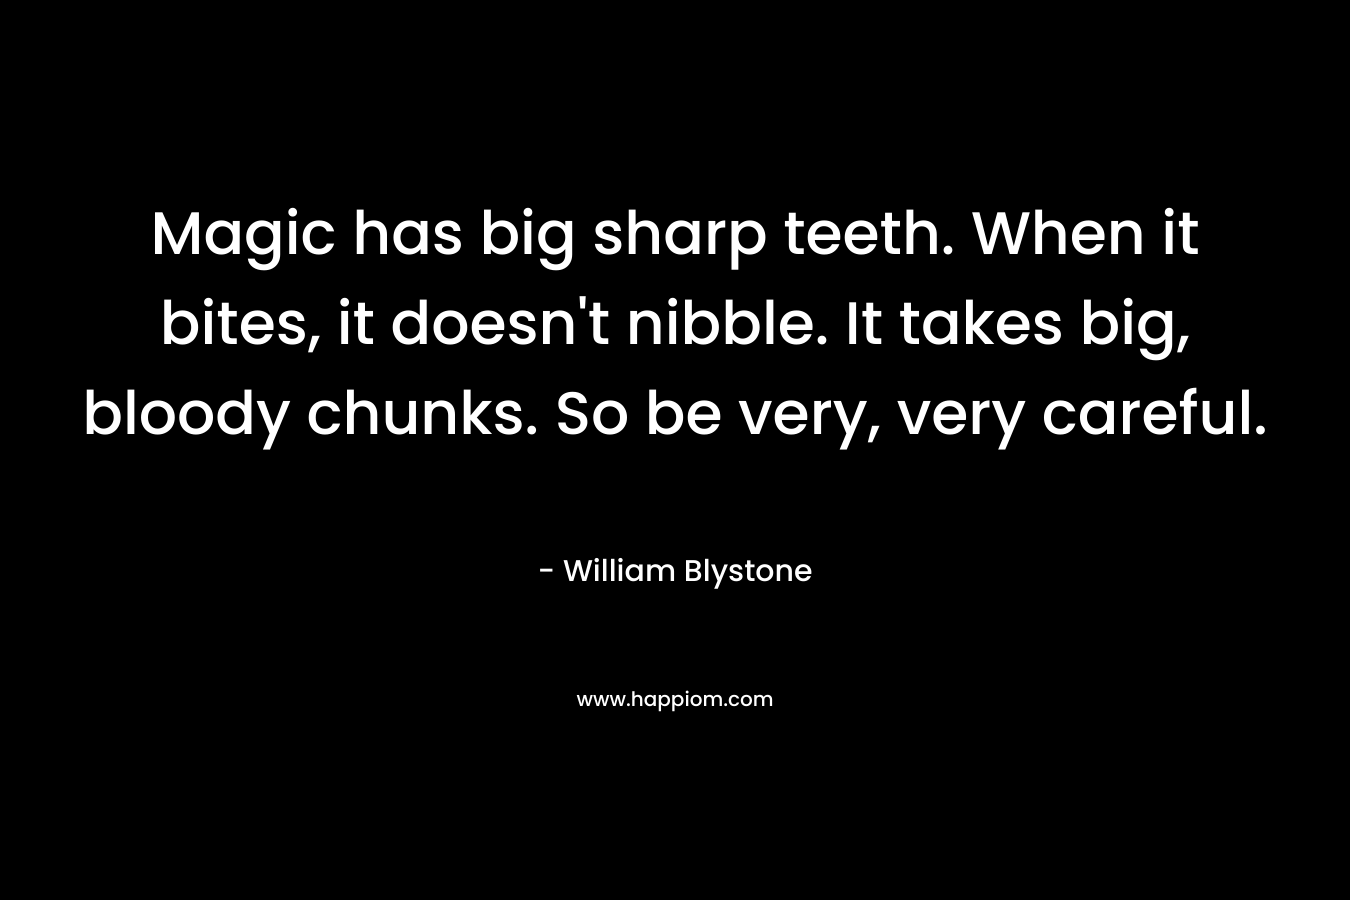 Magic has big sharp teeth. When it bites, it doesn’t nibble. It takes big, bloody chunks. So be very, very careful. – William Blystone